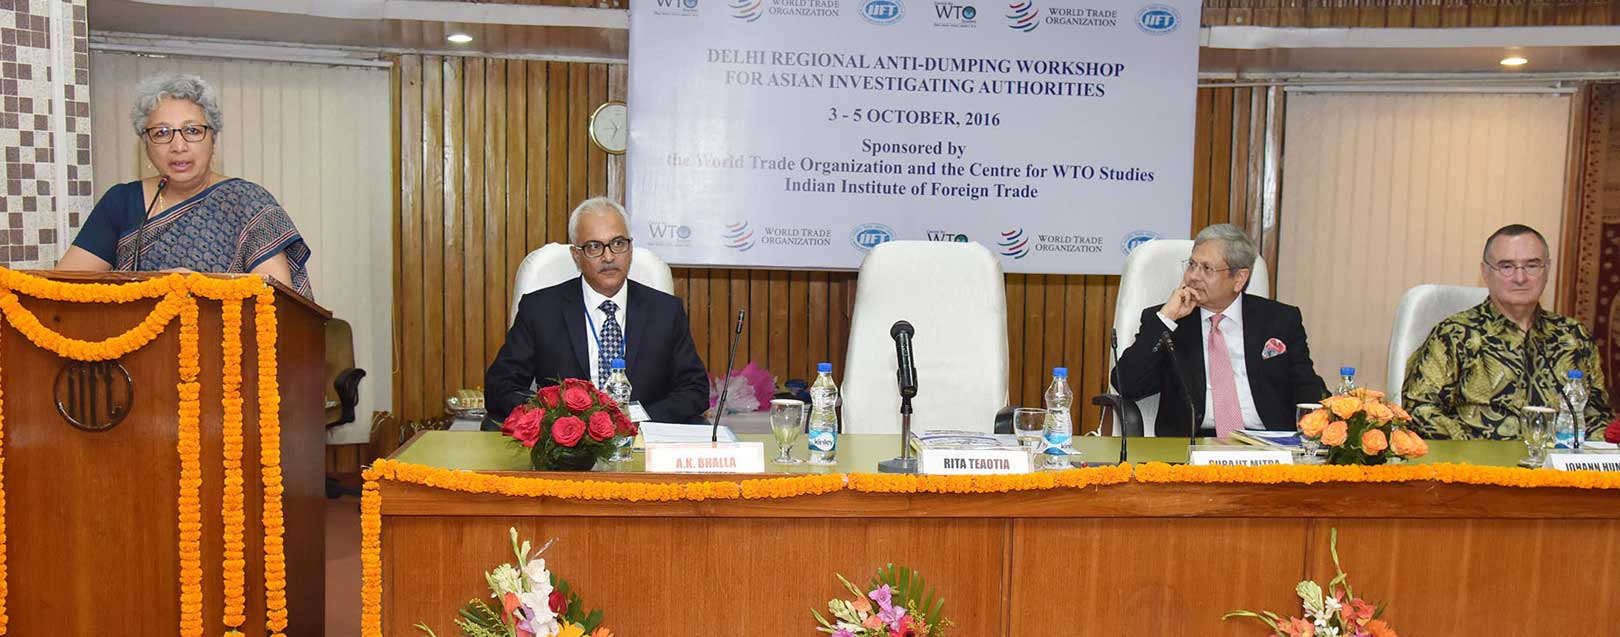 Commerce Ministry launches dedicated website for DGAD